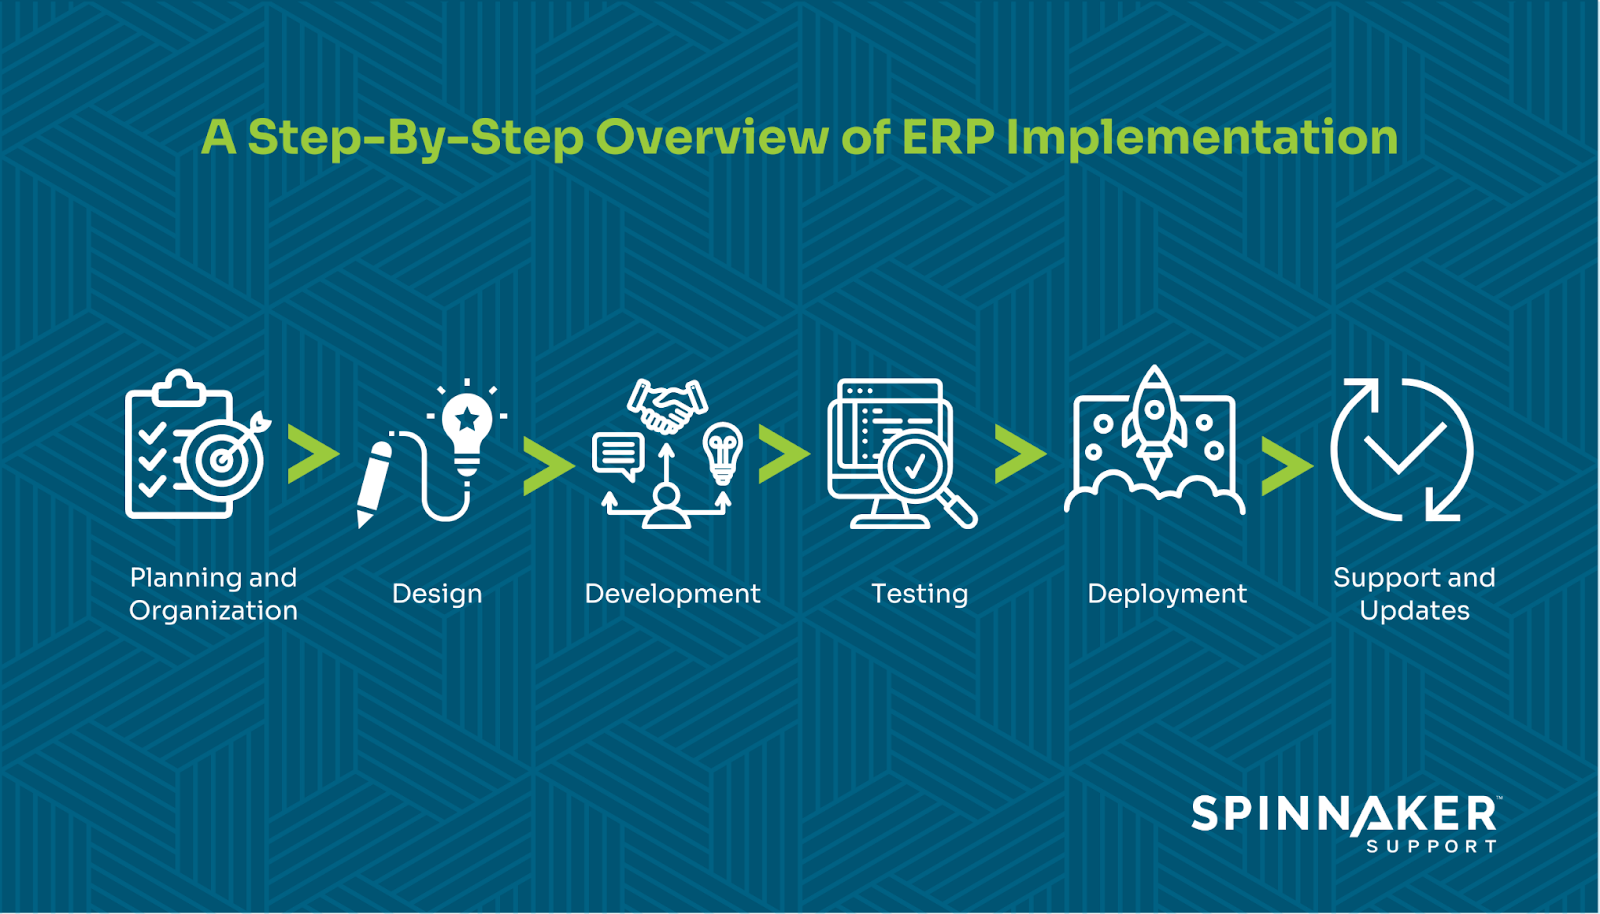 A comprehensive strategy for ERP implementation